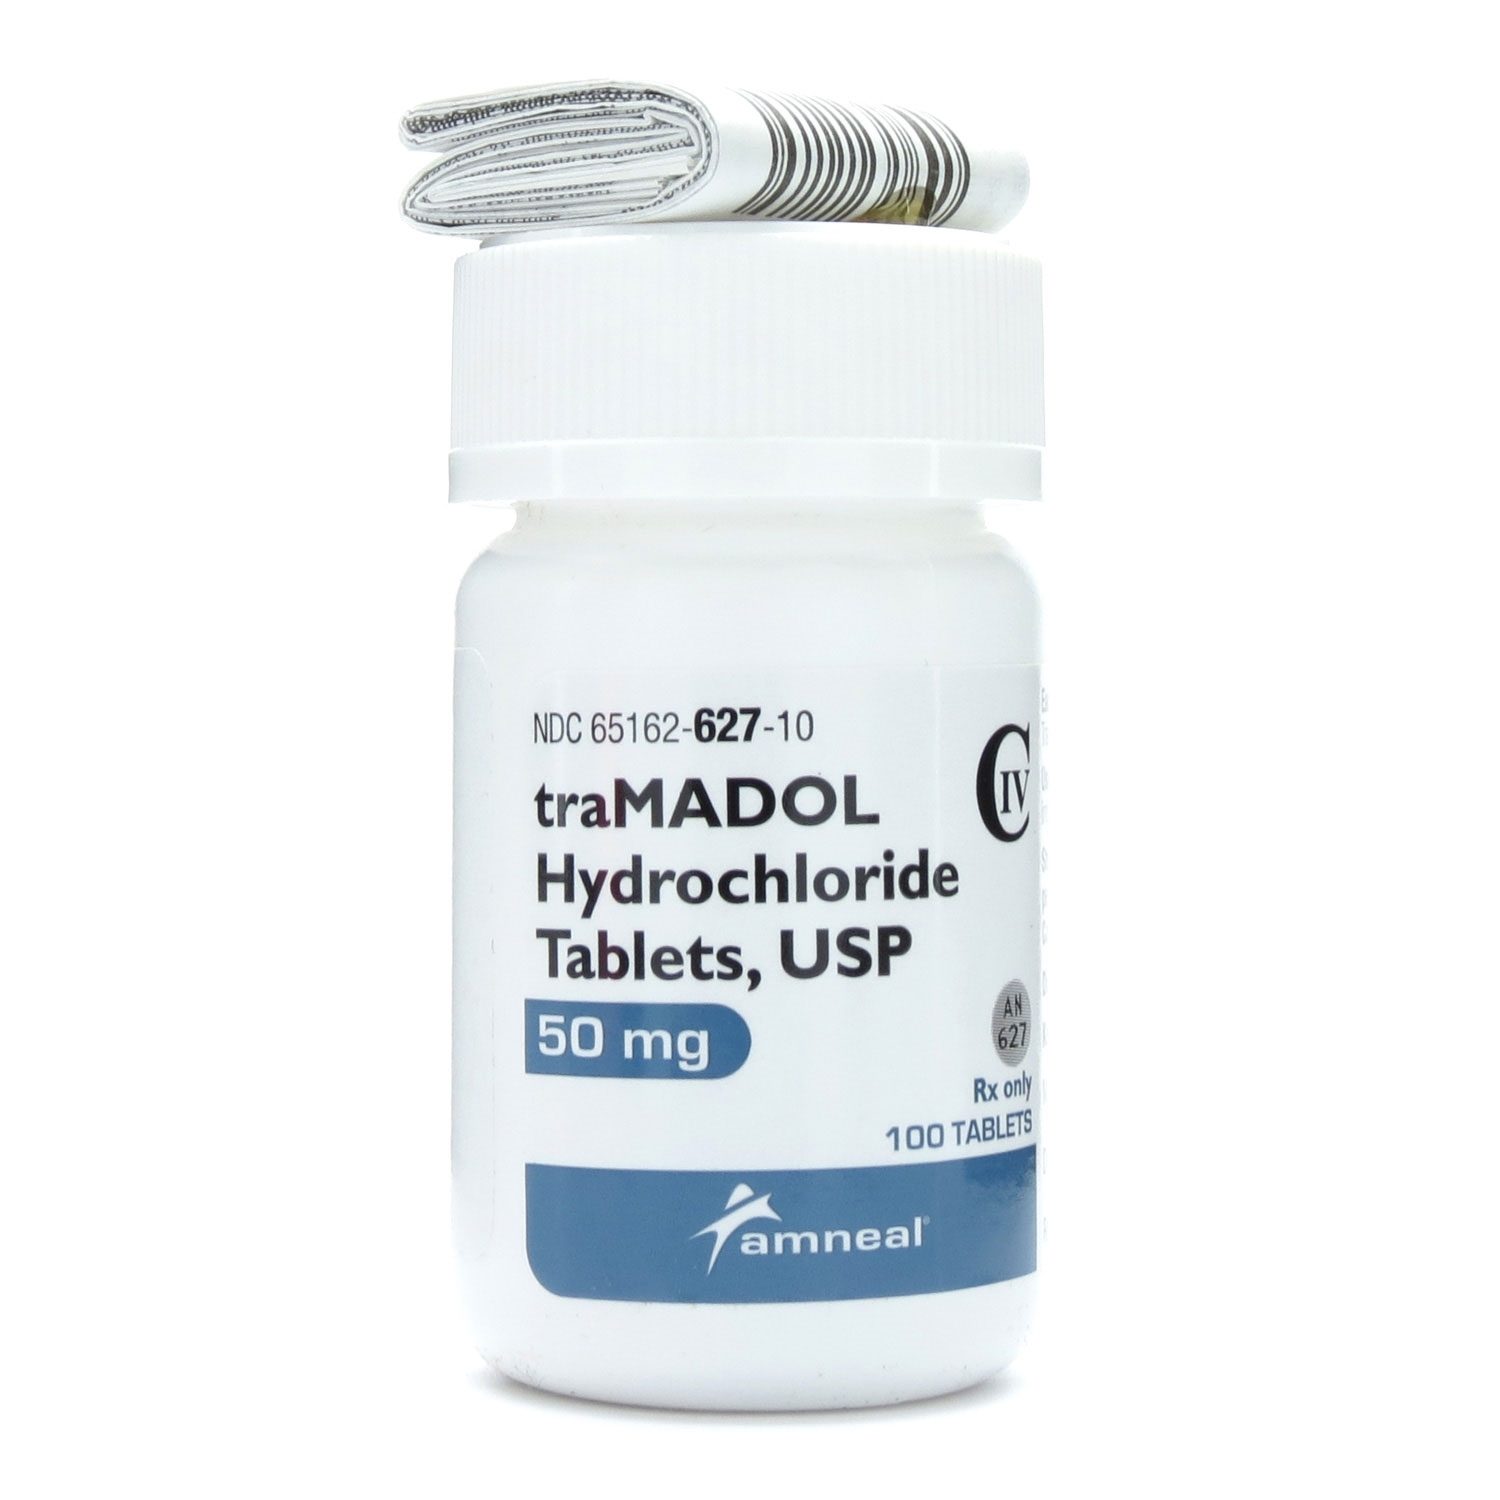 tramadol doses info